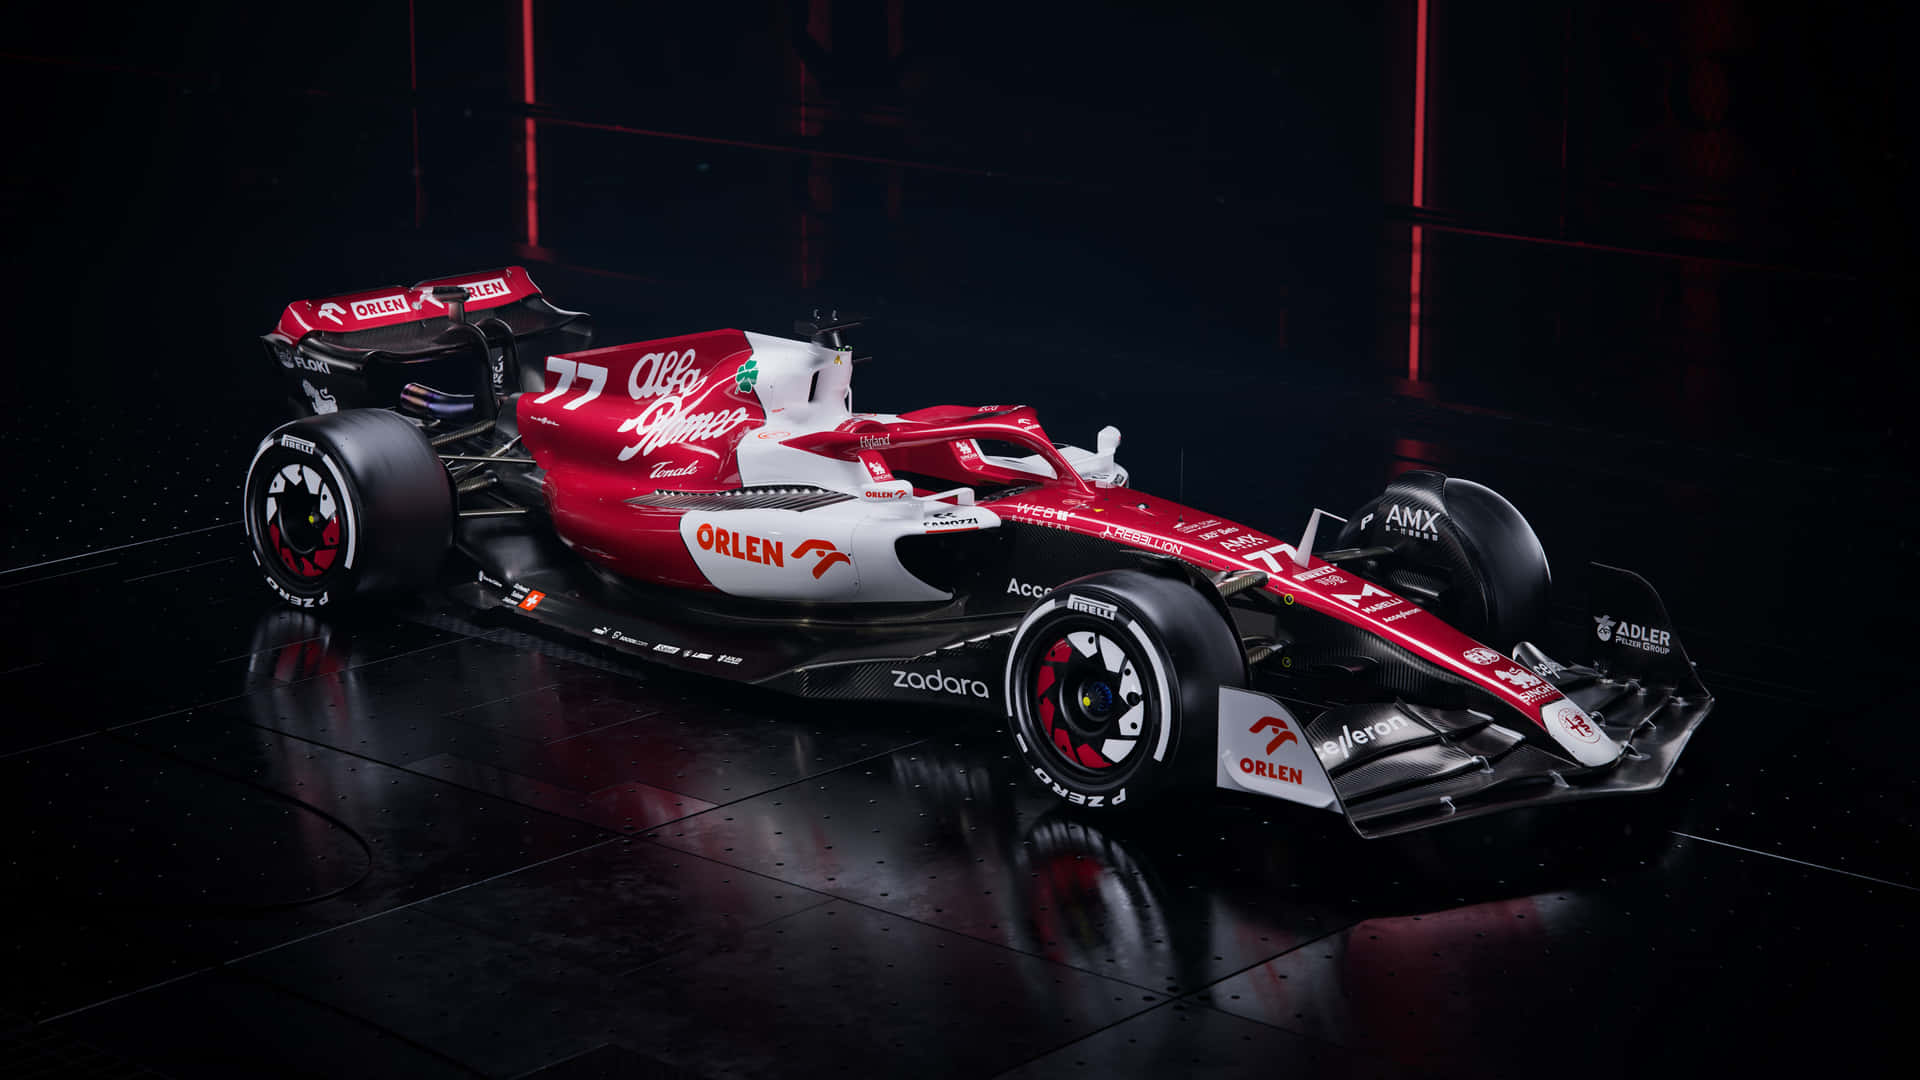 A Red And White Racing Car In A Dark Room Wallpaper